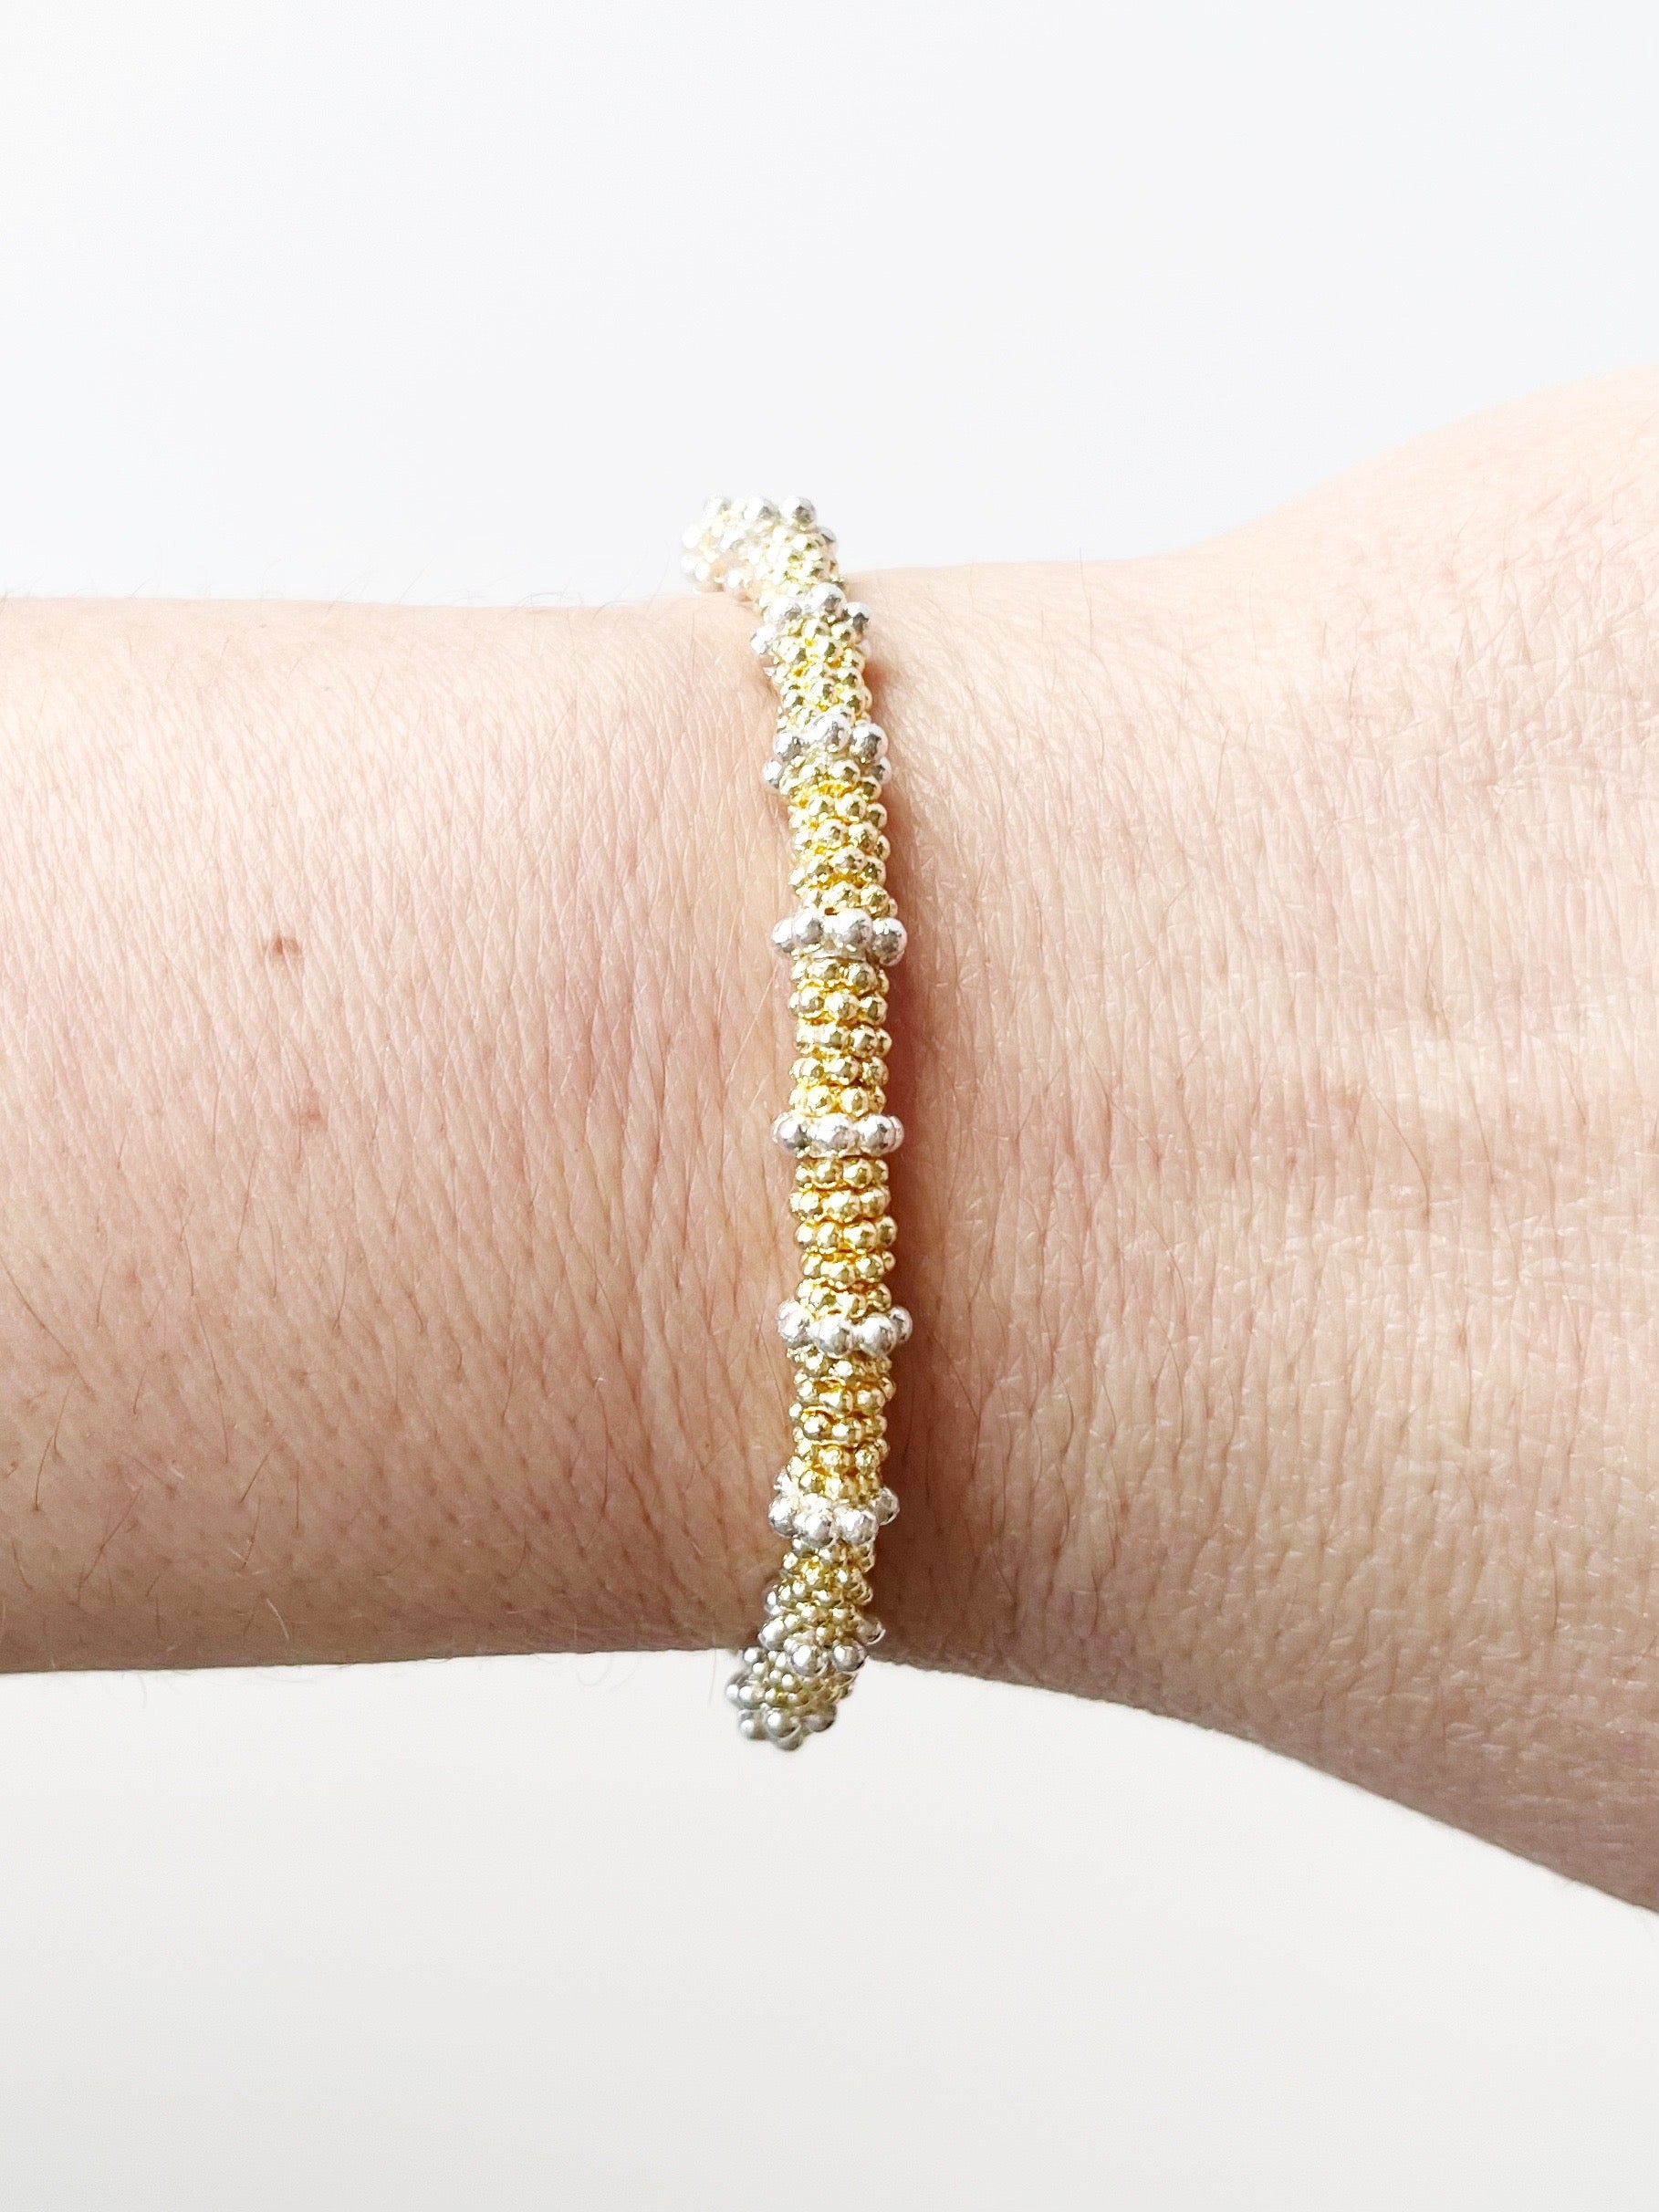 Gold stacking bracelet with silver accents